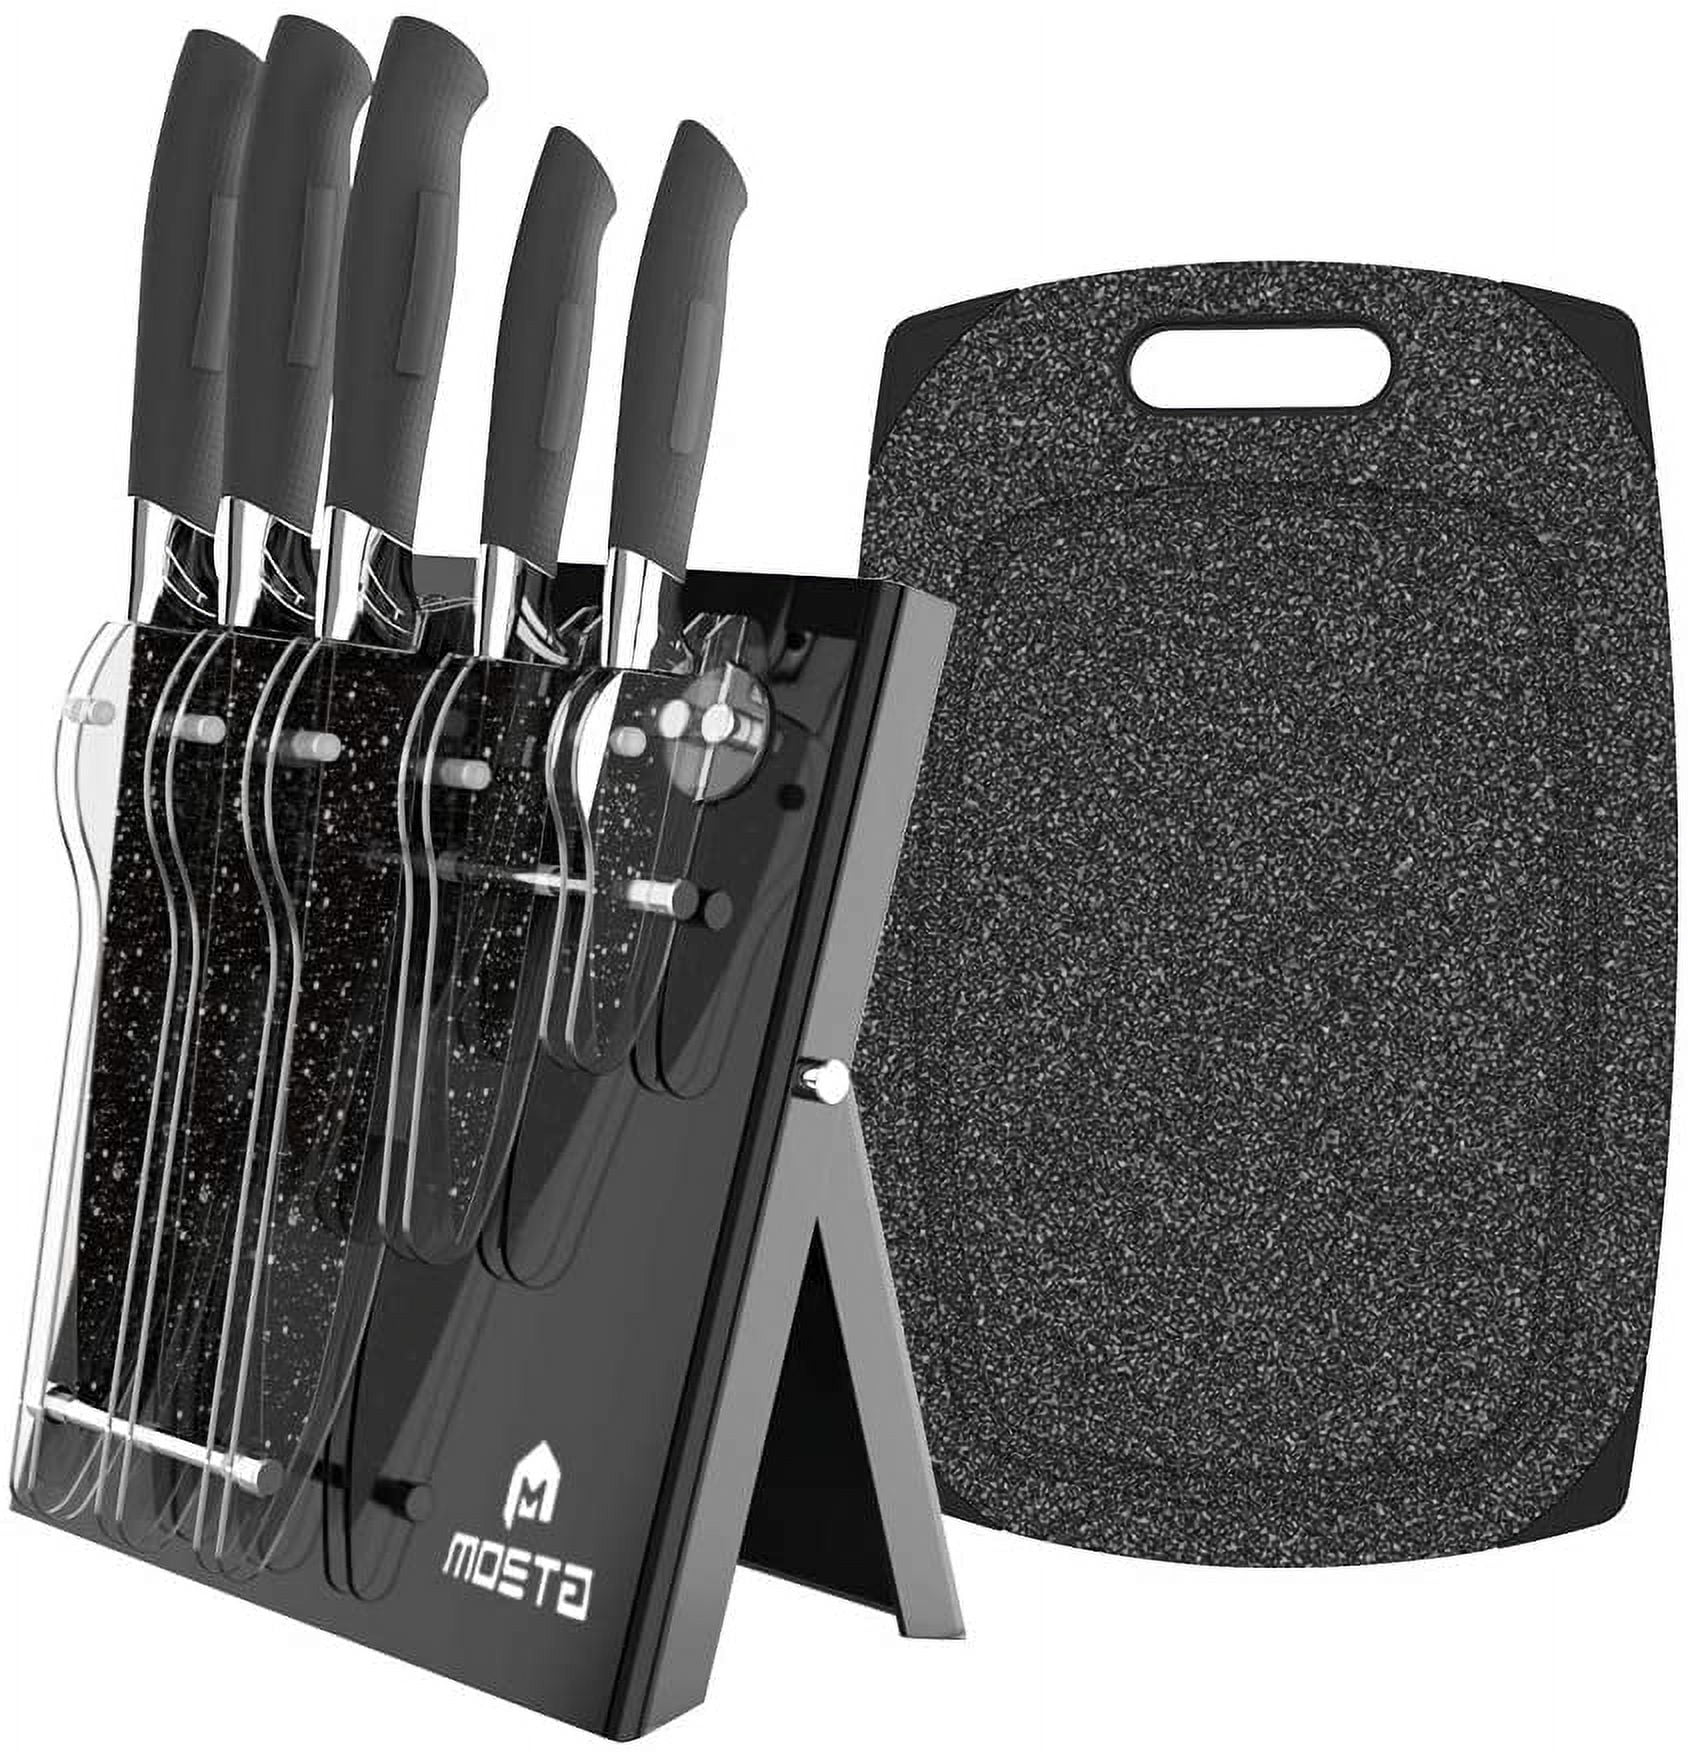 Serrated Royal Blue 5-Piece Ceramic Knife Set with 5 inch Serrated Knife, Kitchen Knife Set. Includes 3, 4, 5, 6 Ceramic Knives, Matching Sheaths and